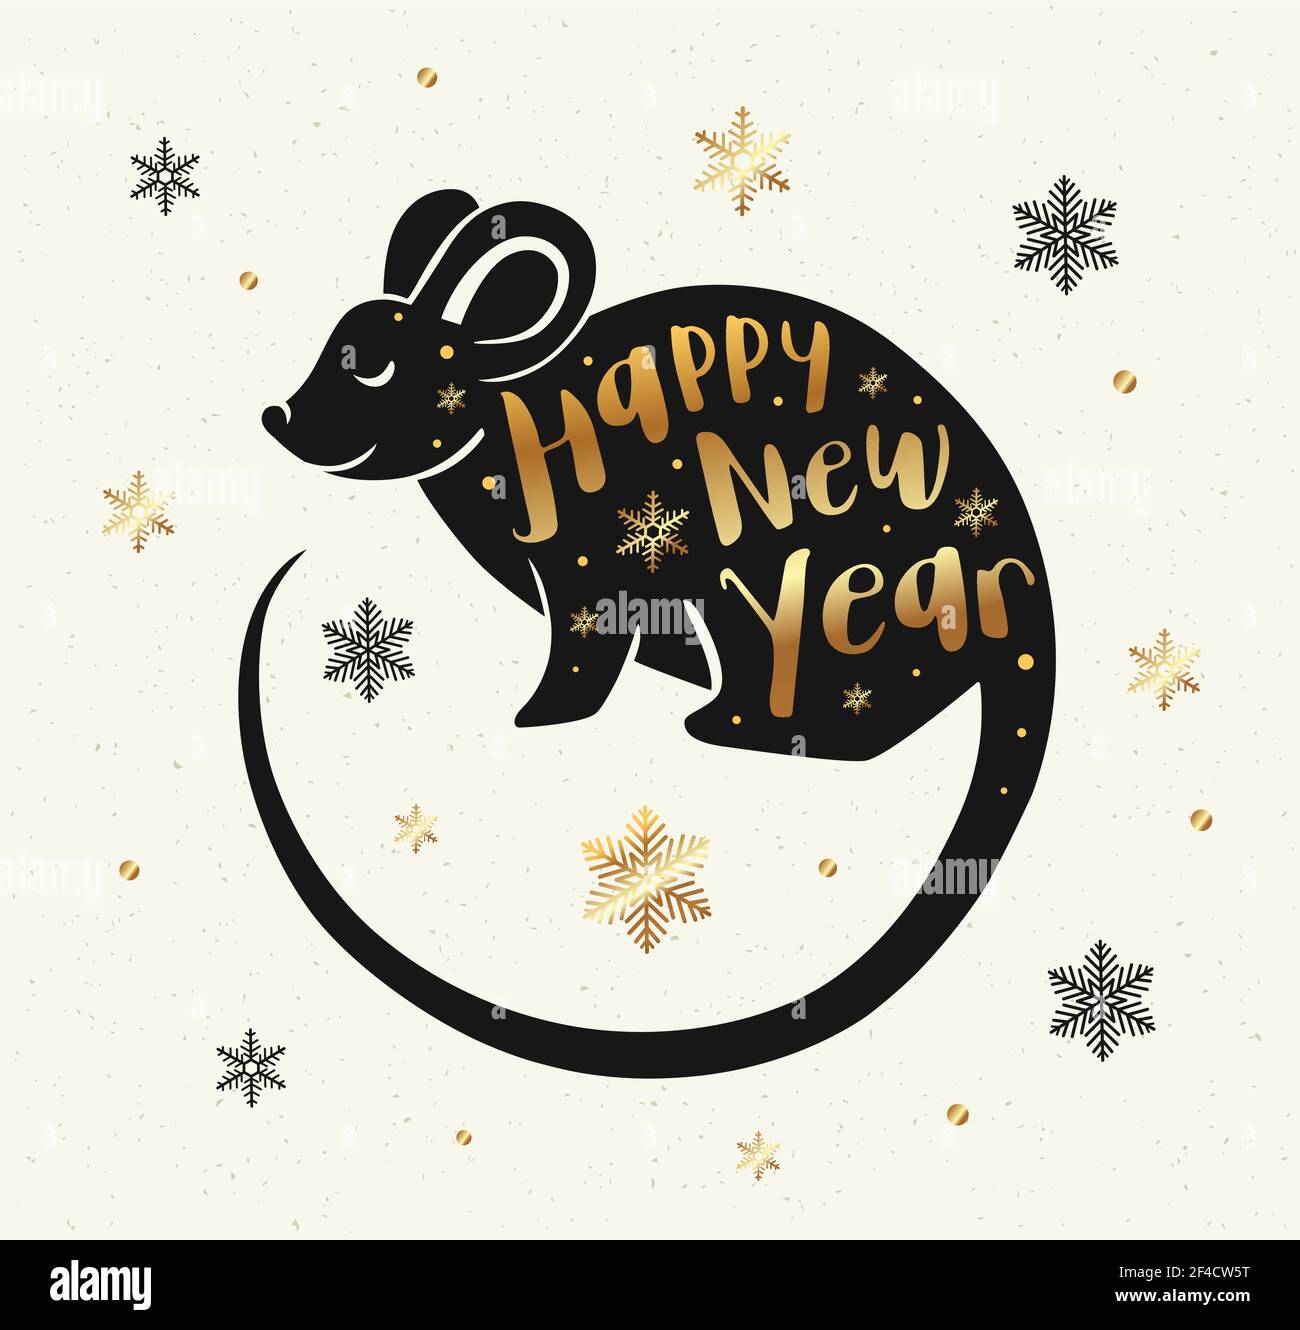 Cute rat symbol of Chinese zodiac for 2020 new year. Black silhouette of rat, golden snowflakes and lettering. Vector illustration Stock Vector